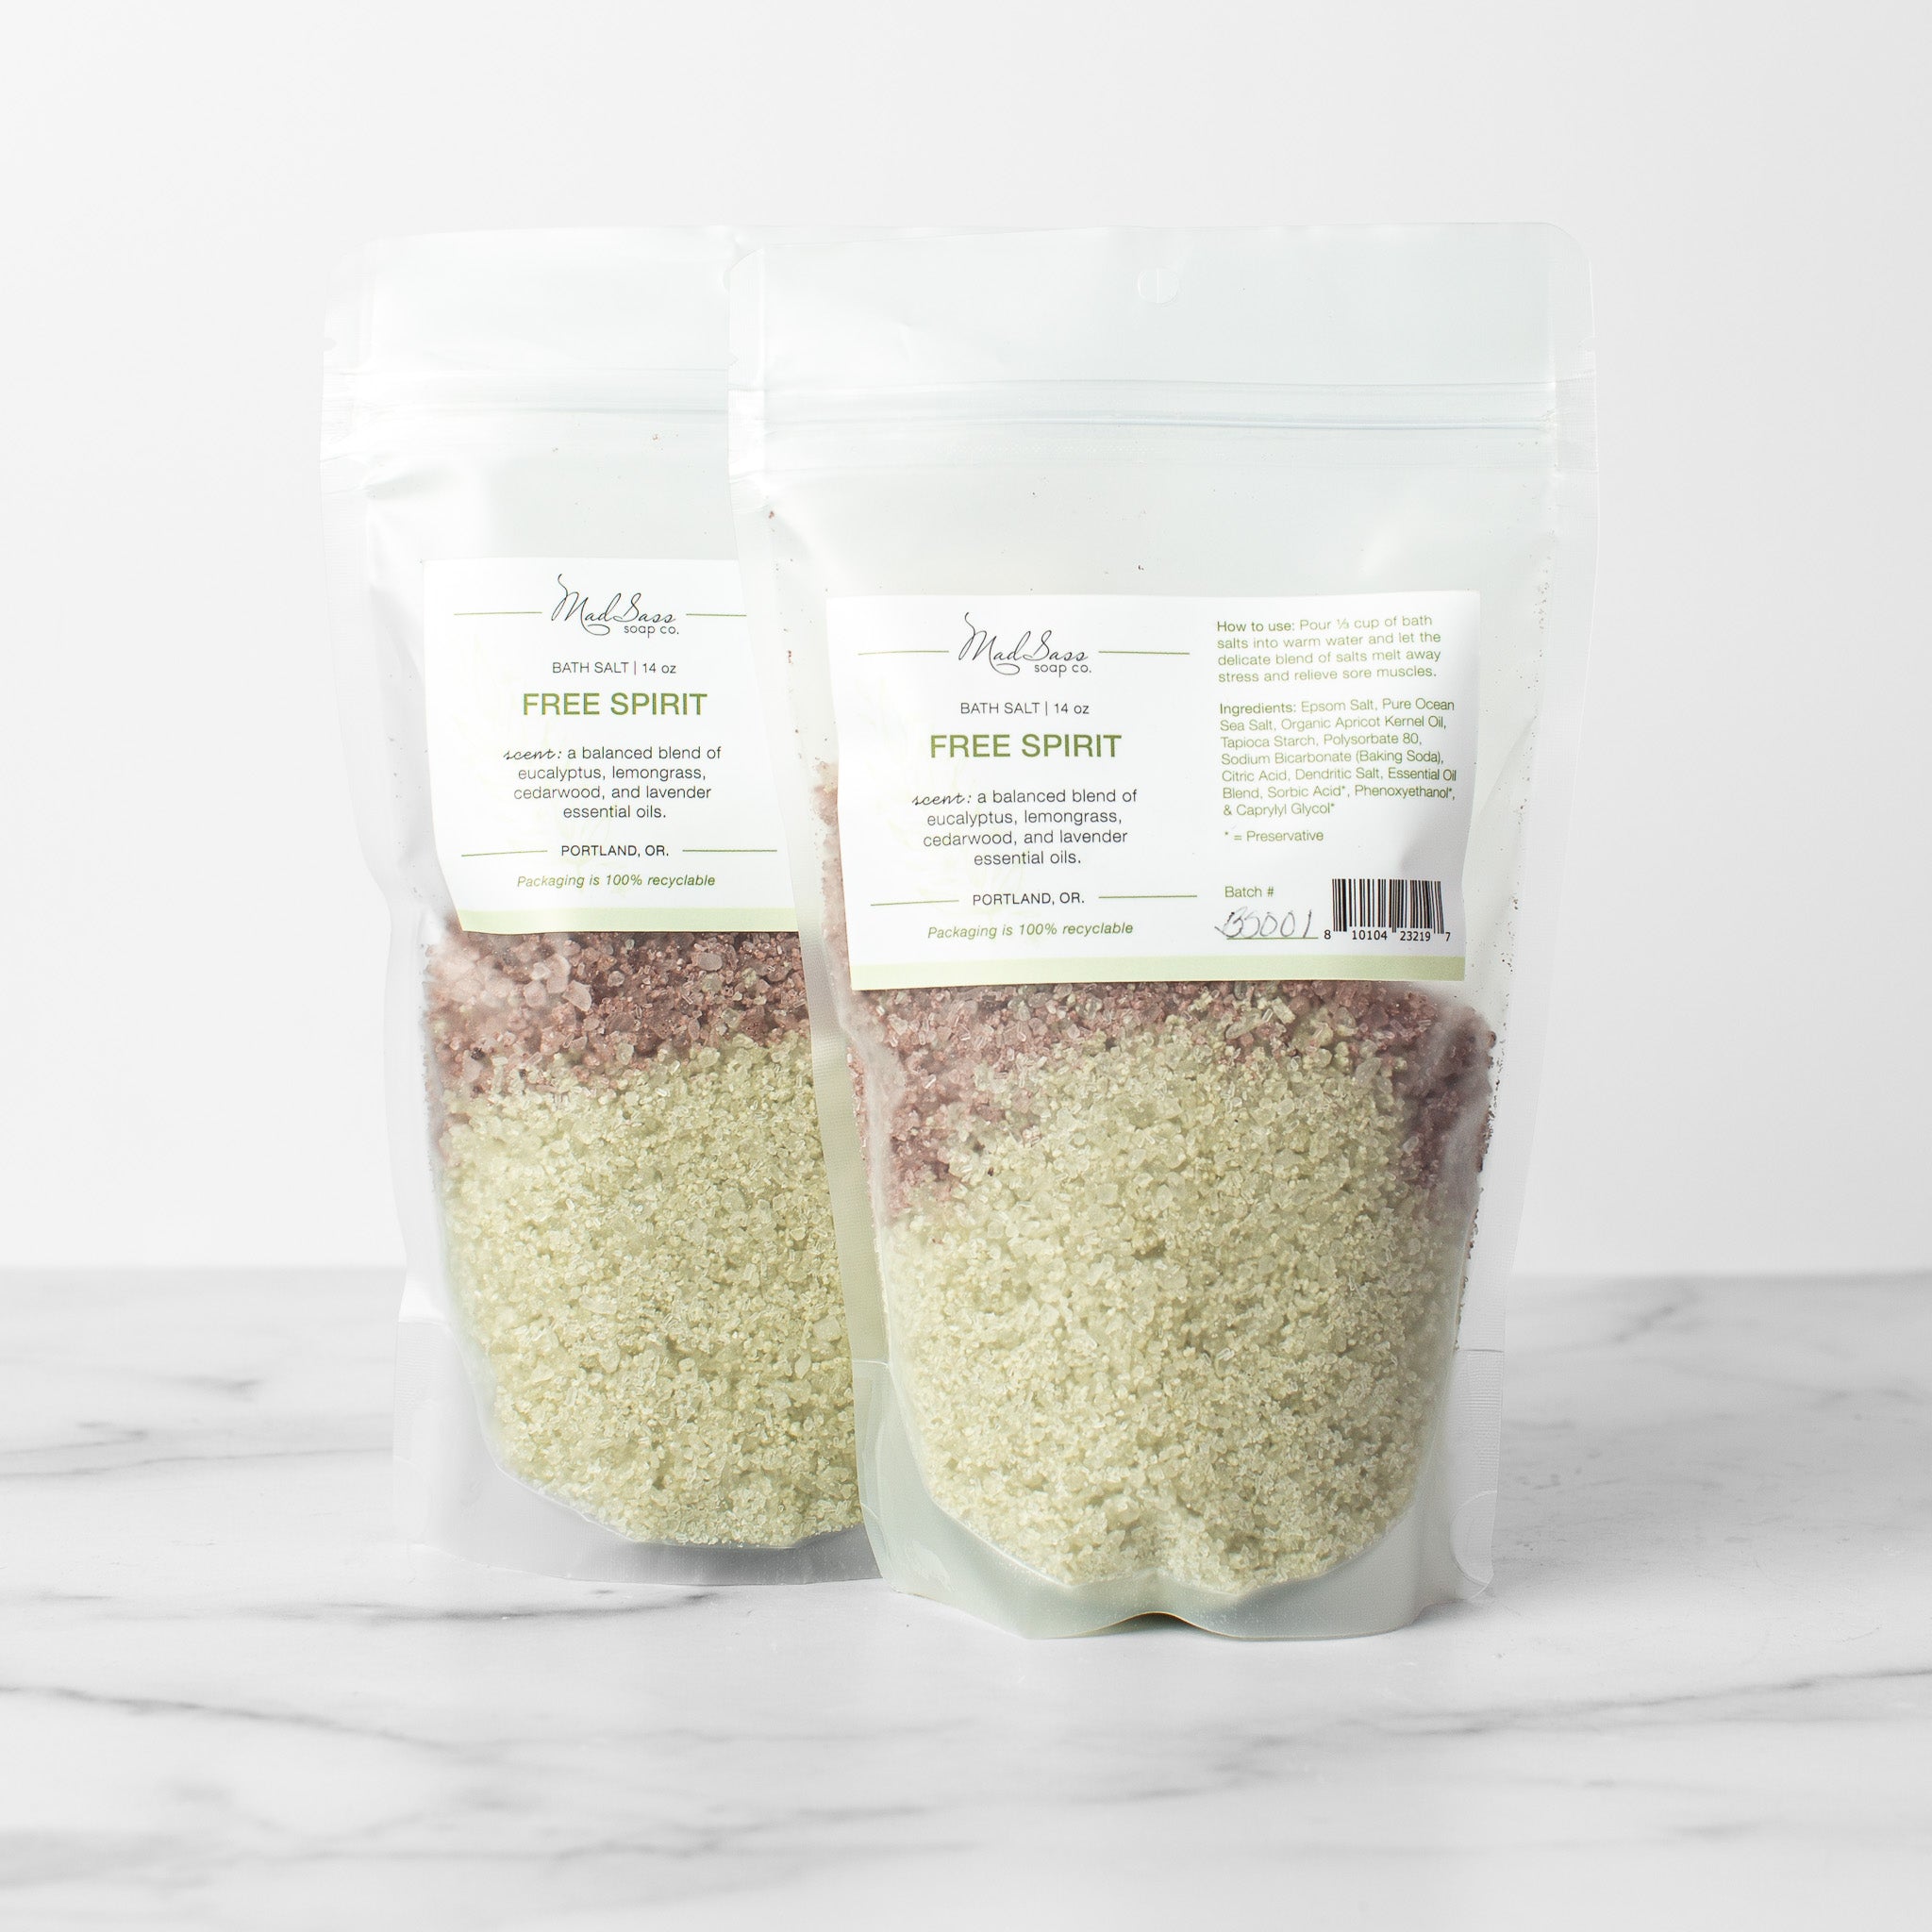 Two bags of Free Spirit bath salts on a white background. Free Spirit is a two toned layered bath salt in green and purple.